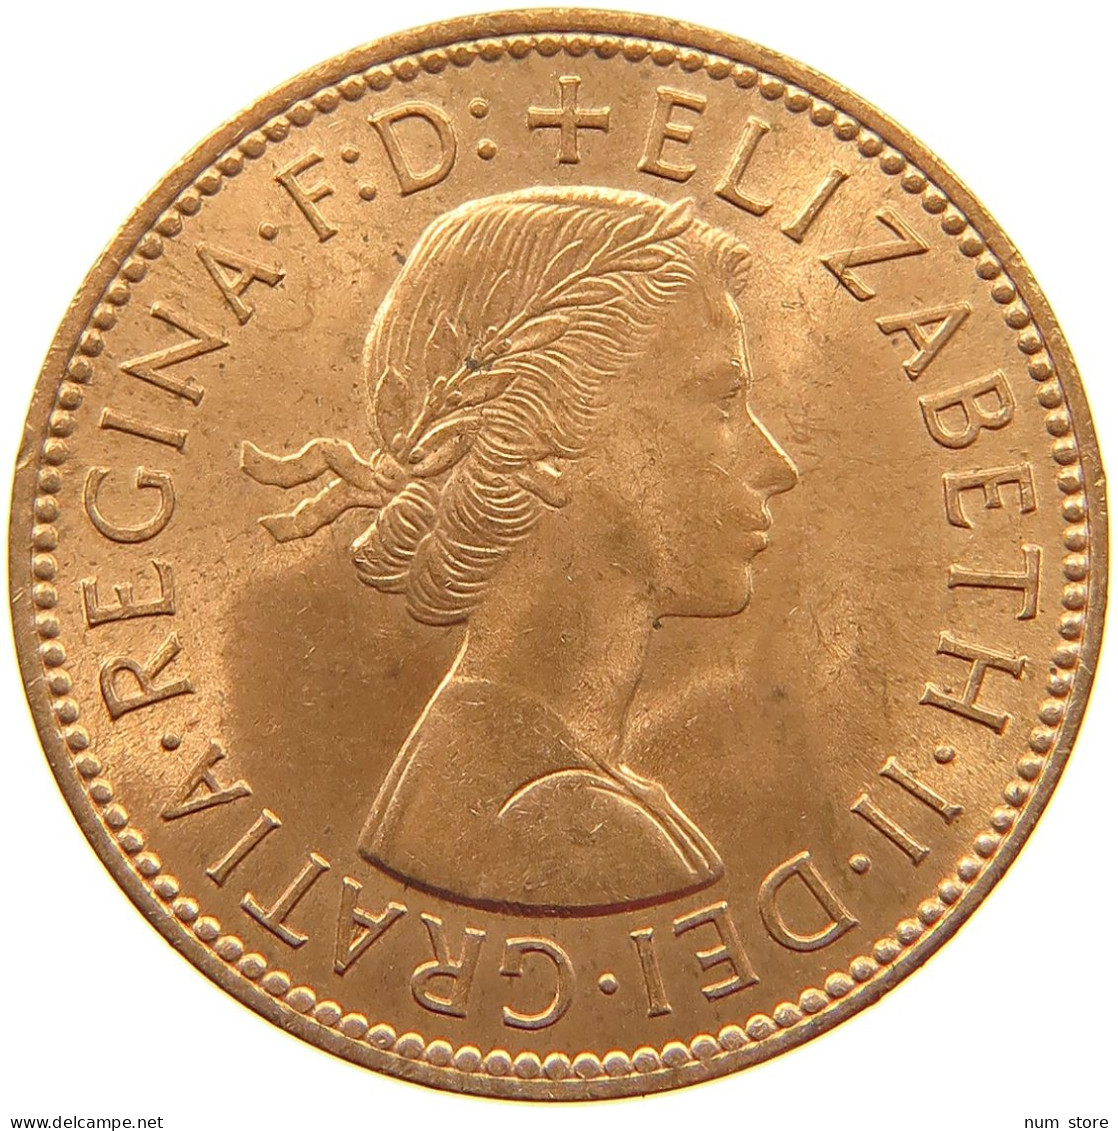 GREAT BRITAIN HALFPENNY 1963 TOP #a039 0321 - C. 1/2 Penny